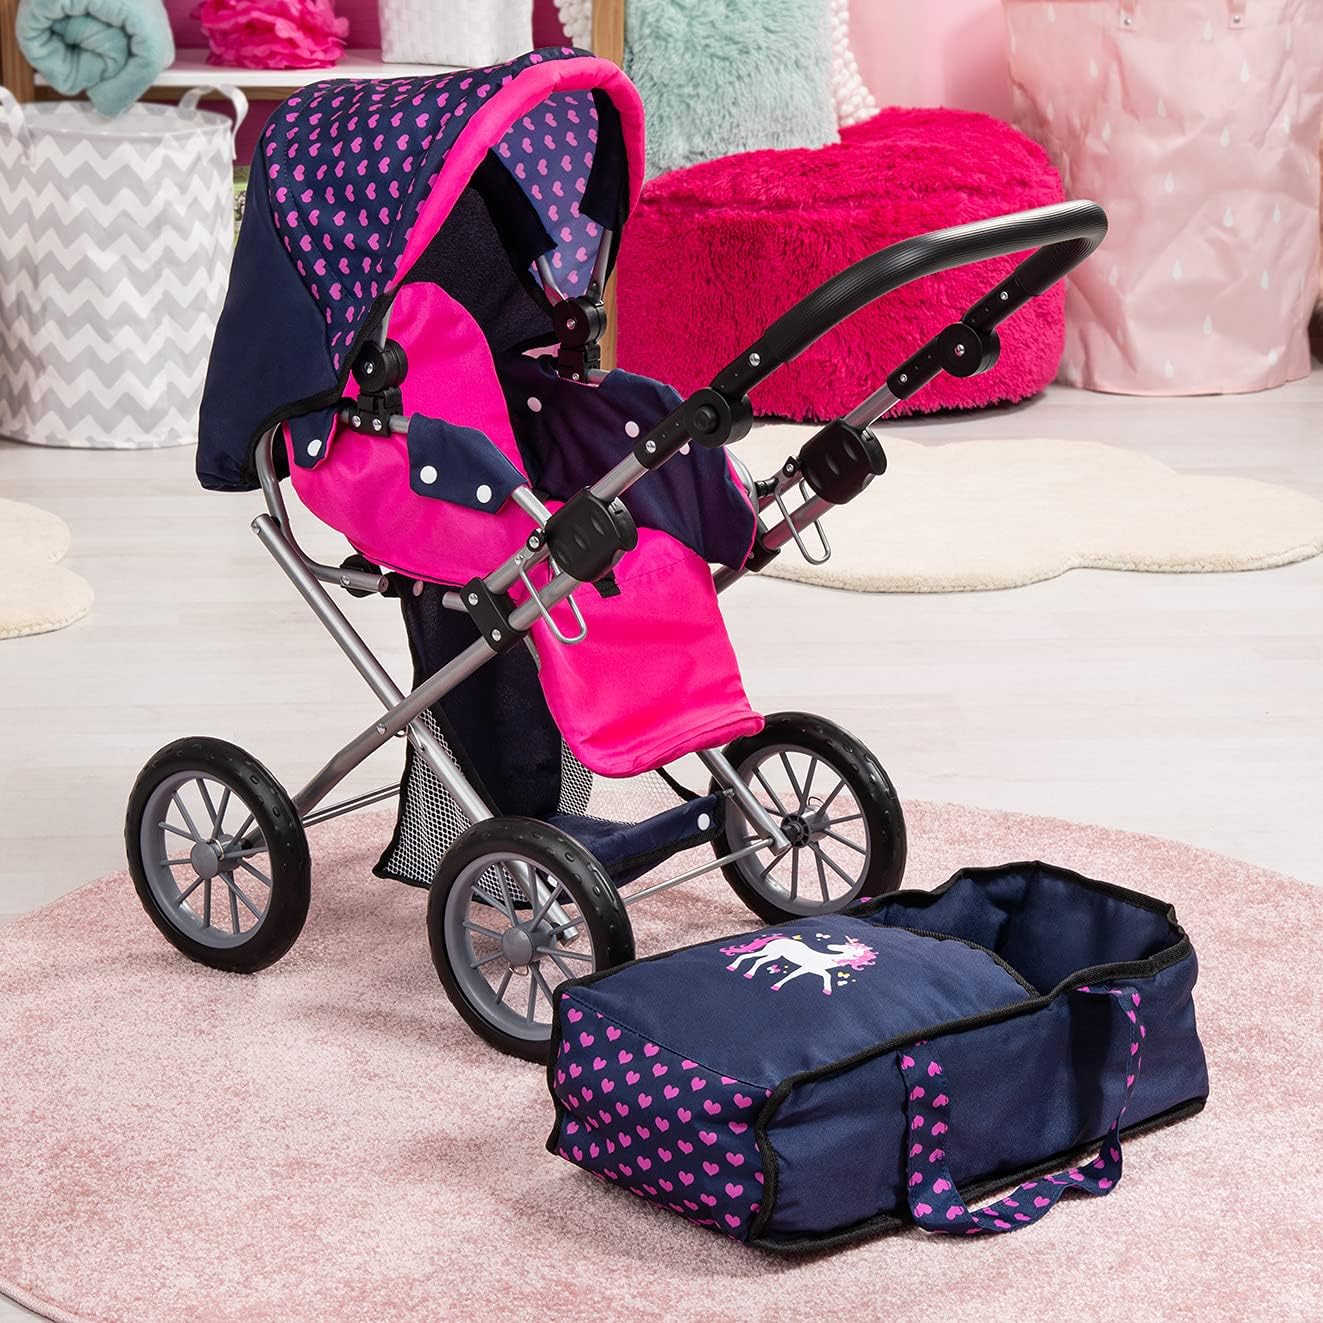 Baby Doll City Star Pram in Polka Dots, Blue and Pink - SILBERSHELL